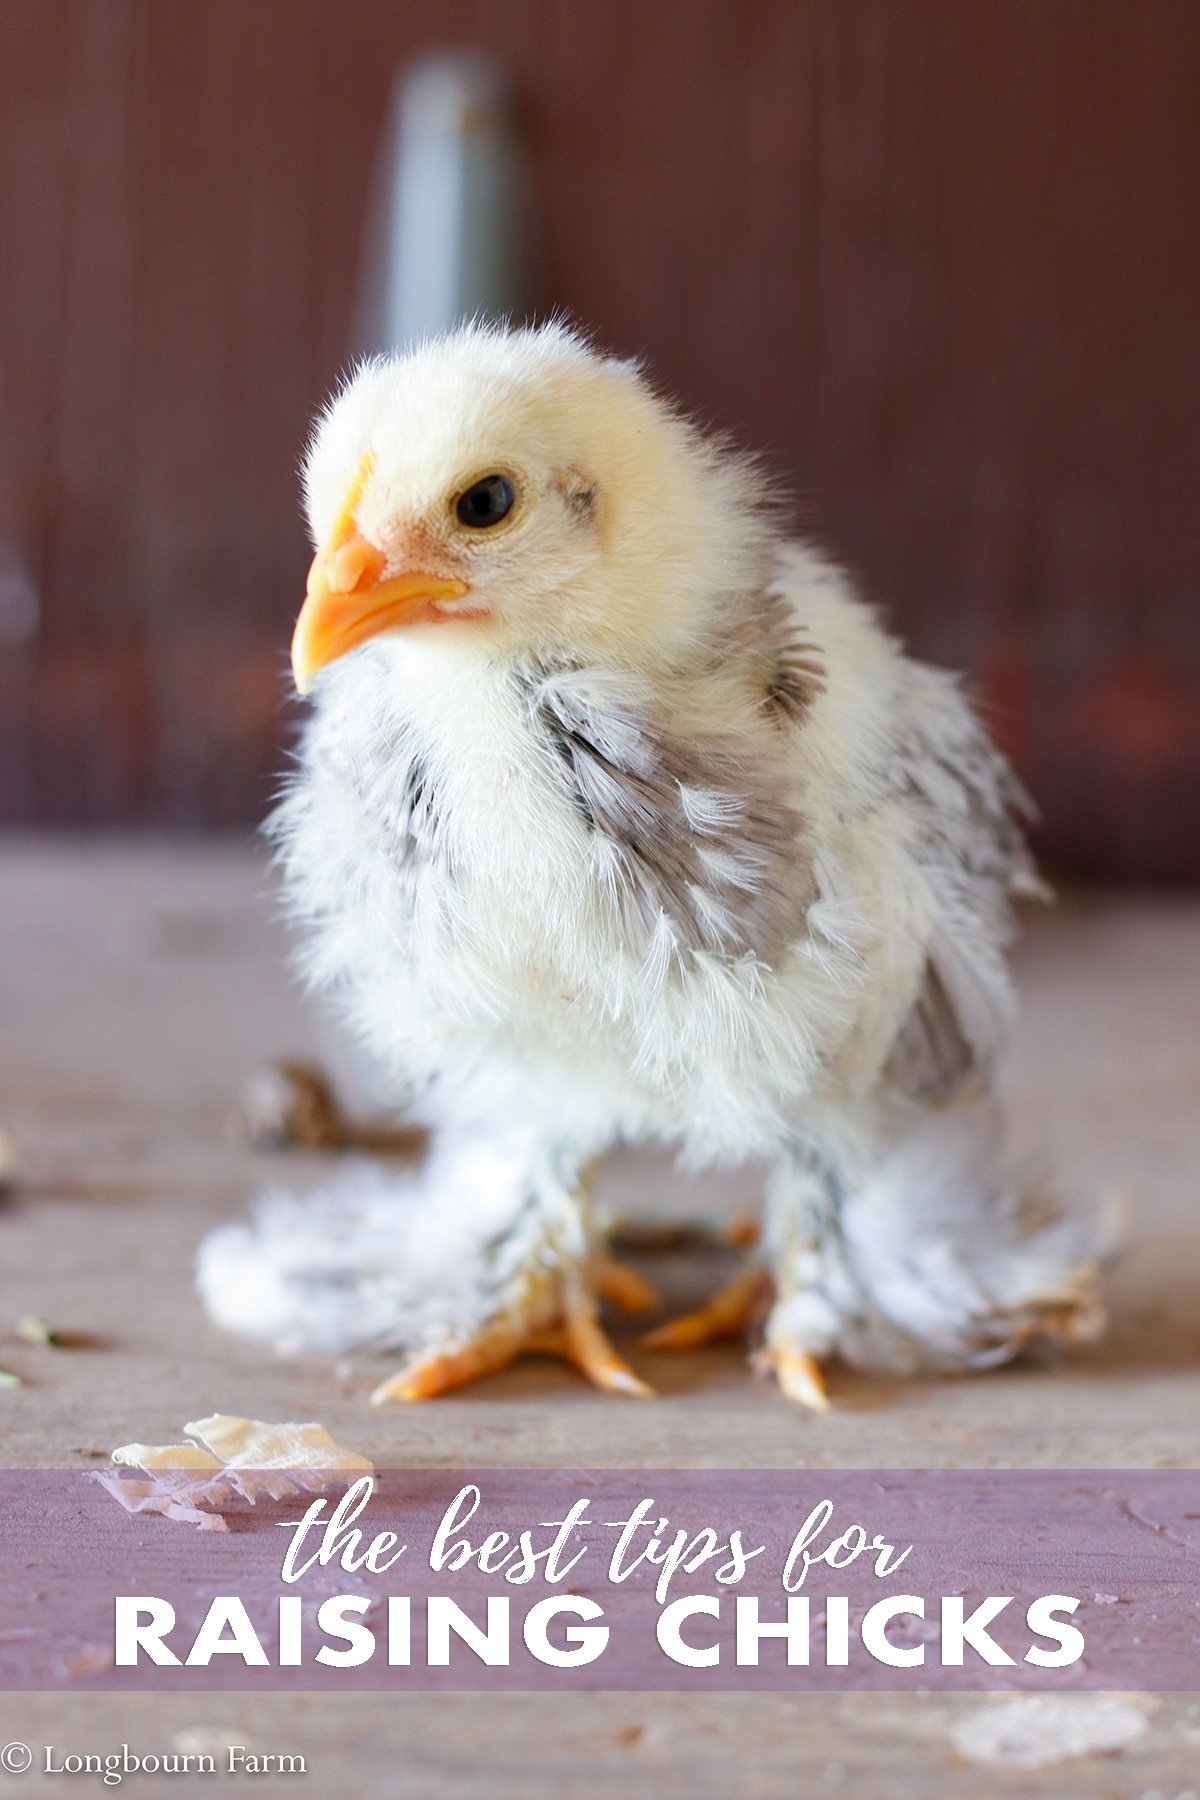 Are you interested in raising baby chicks? Check out this guide for everything you need to know when learning how to raise chicks. #chickens #chickenlady #crazychickenlady #raisingchicks #babychicks #raisingbabychicks #howtoraisechicks #fresheggs #fresheggsdaily #raisingchicksforbeginners #chickbrooder #raisingchickstips